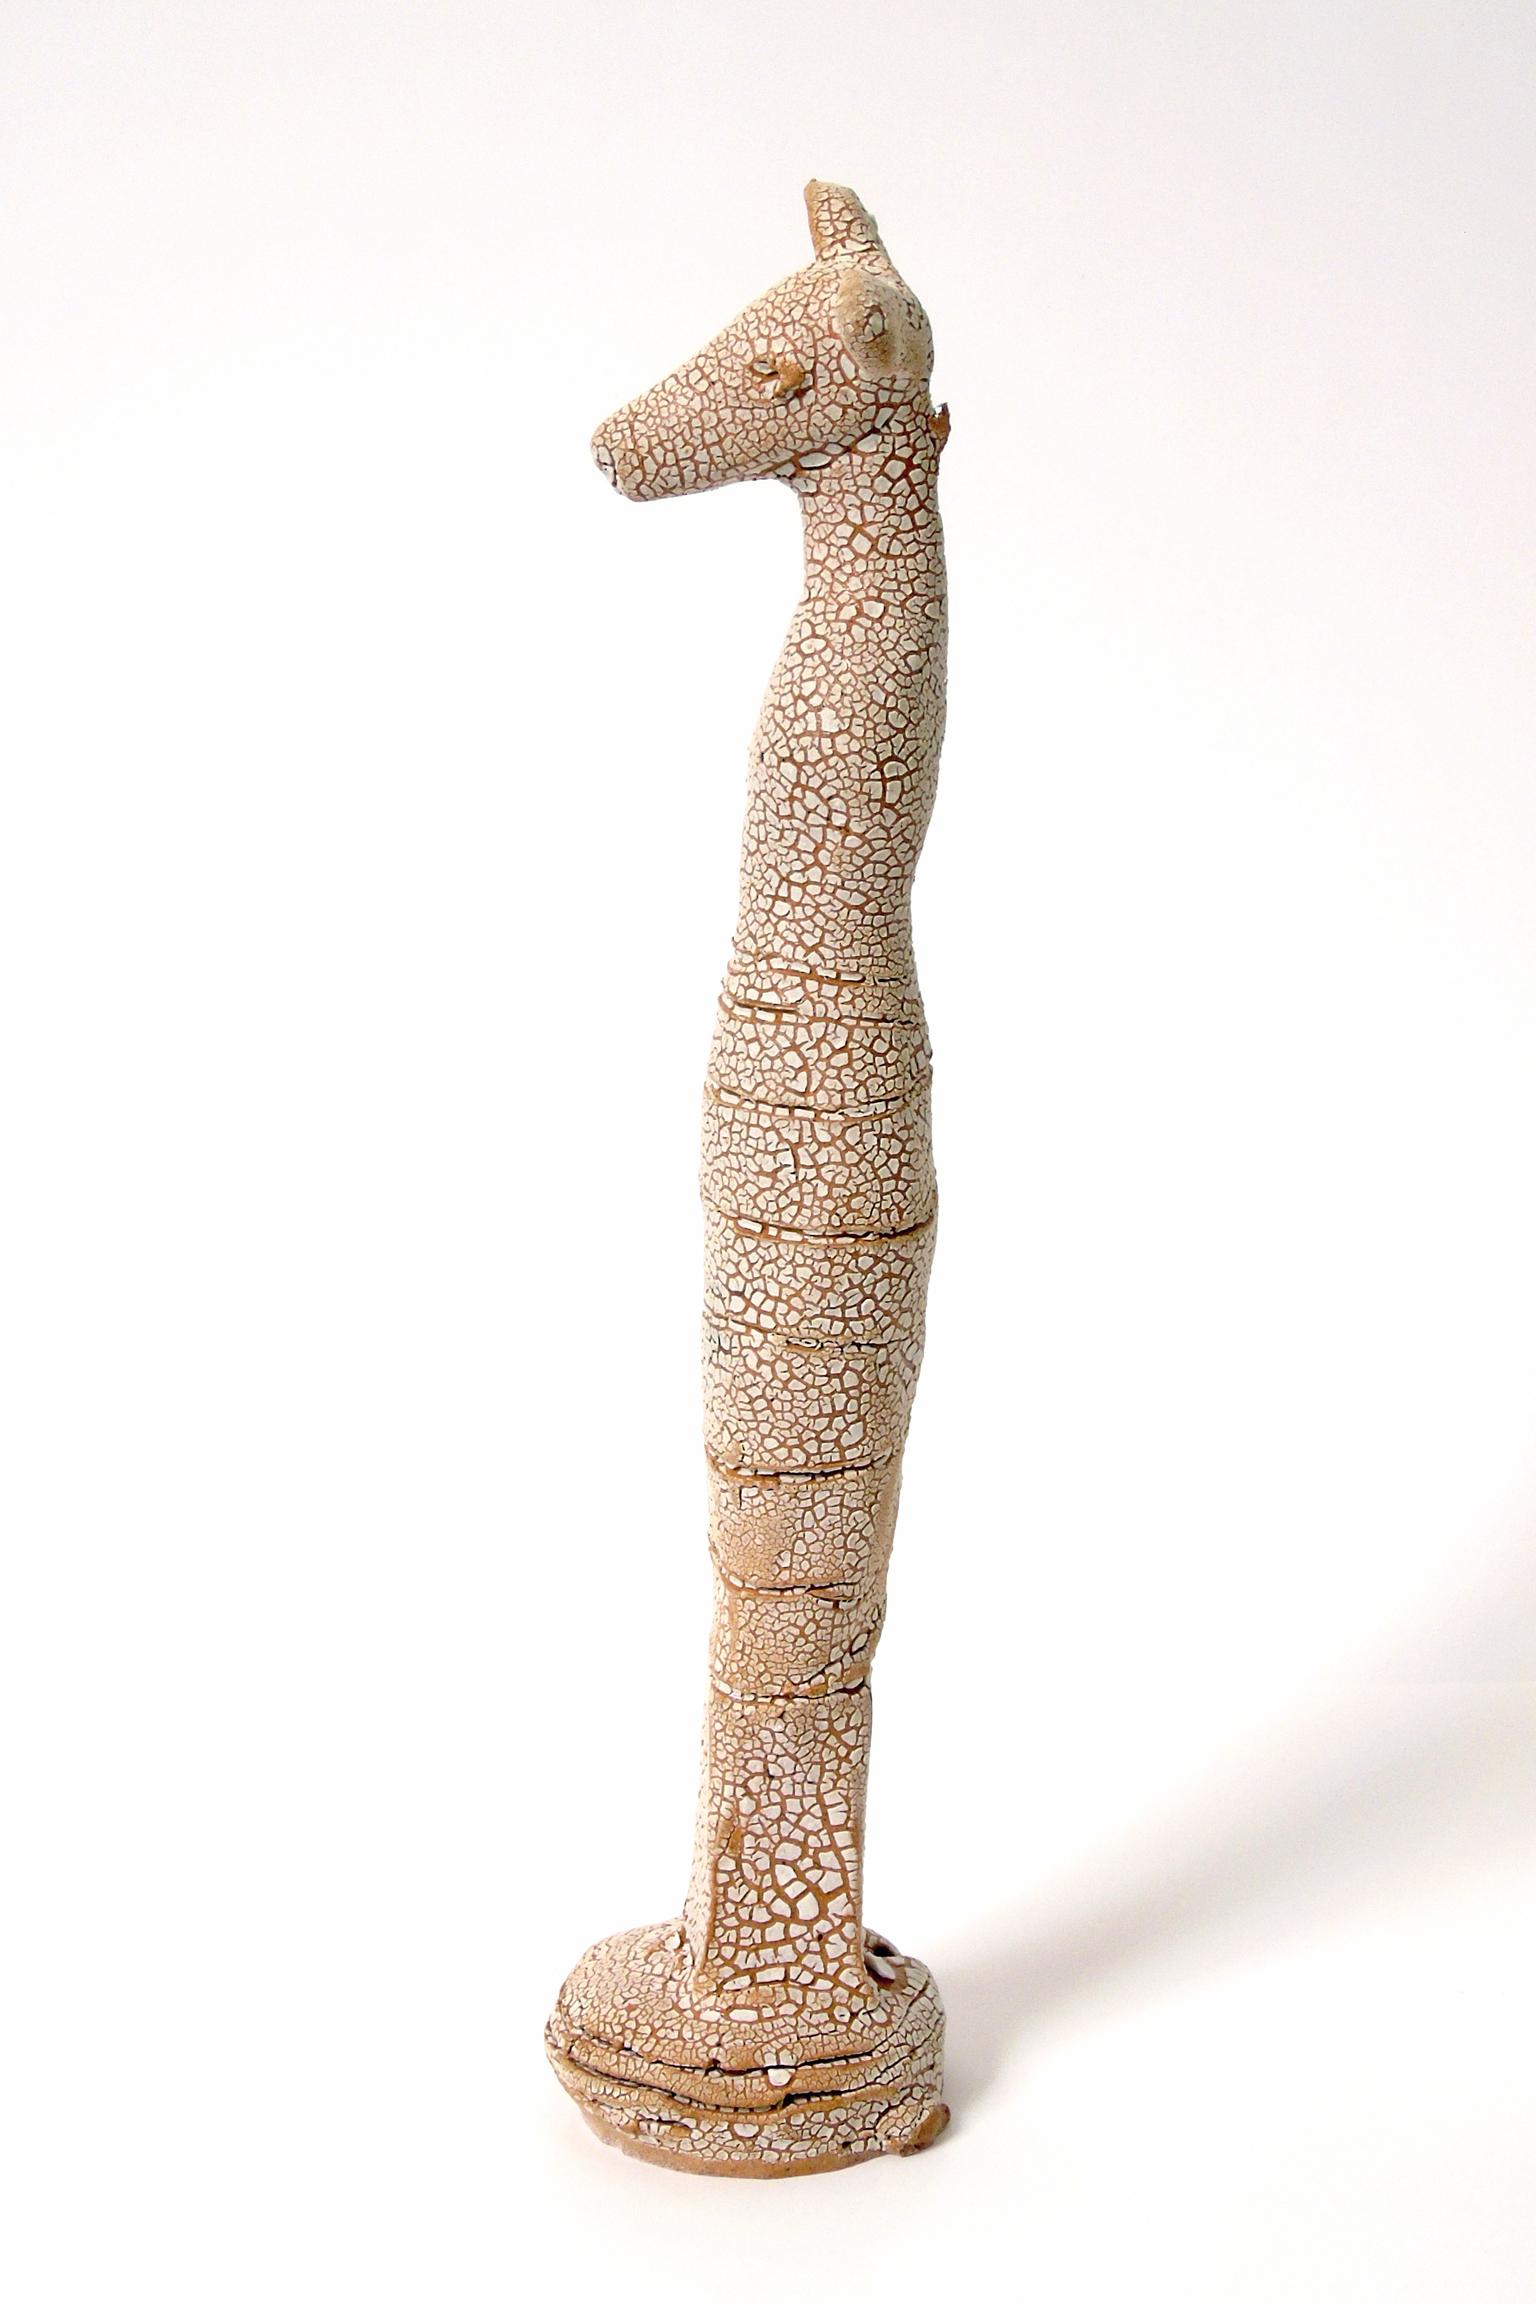 Tiny Deer Totem -95 - Contemporary Sculpture by Robin Whiteman